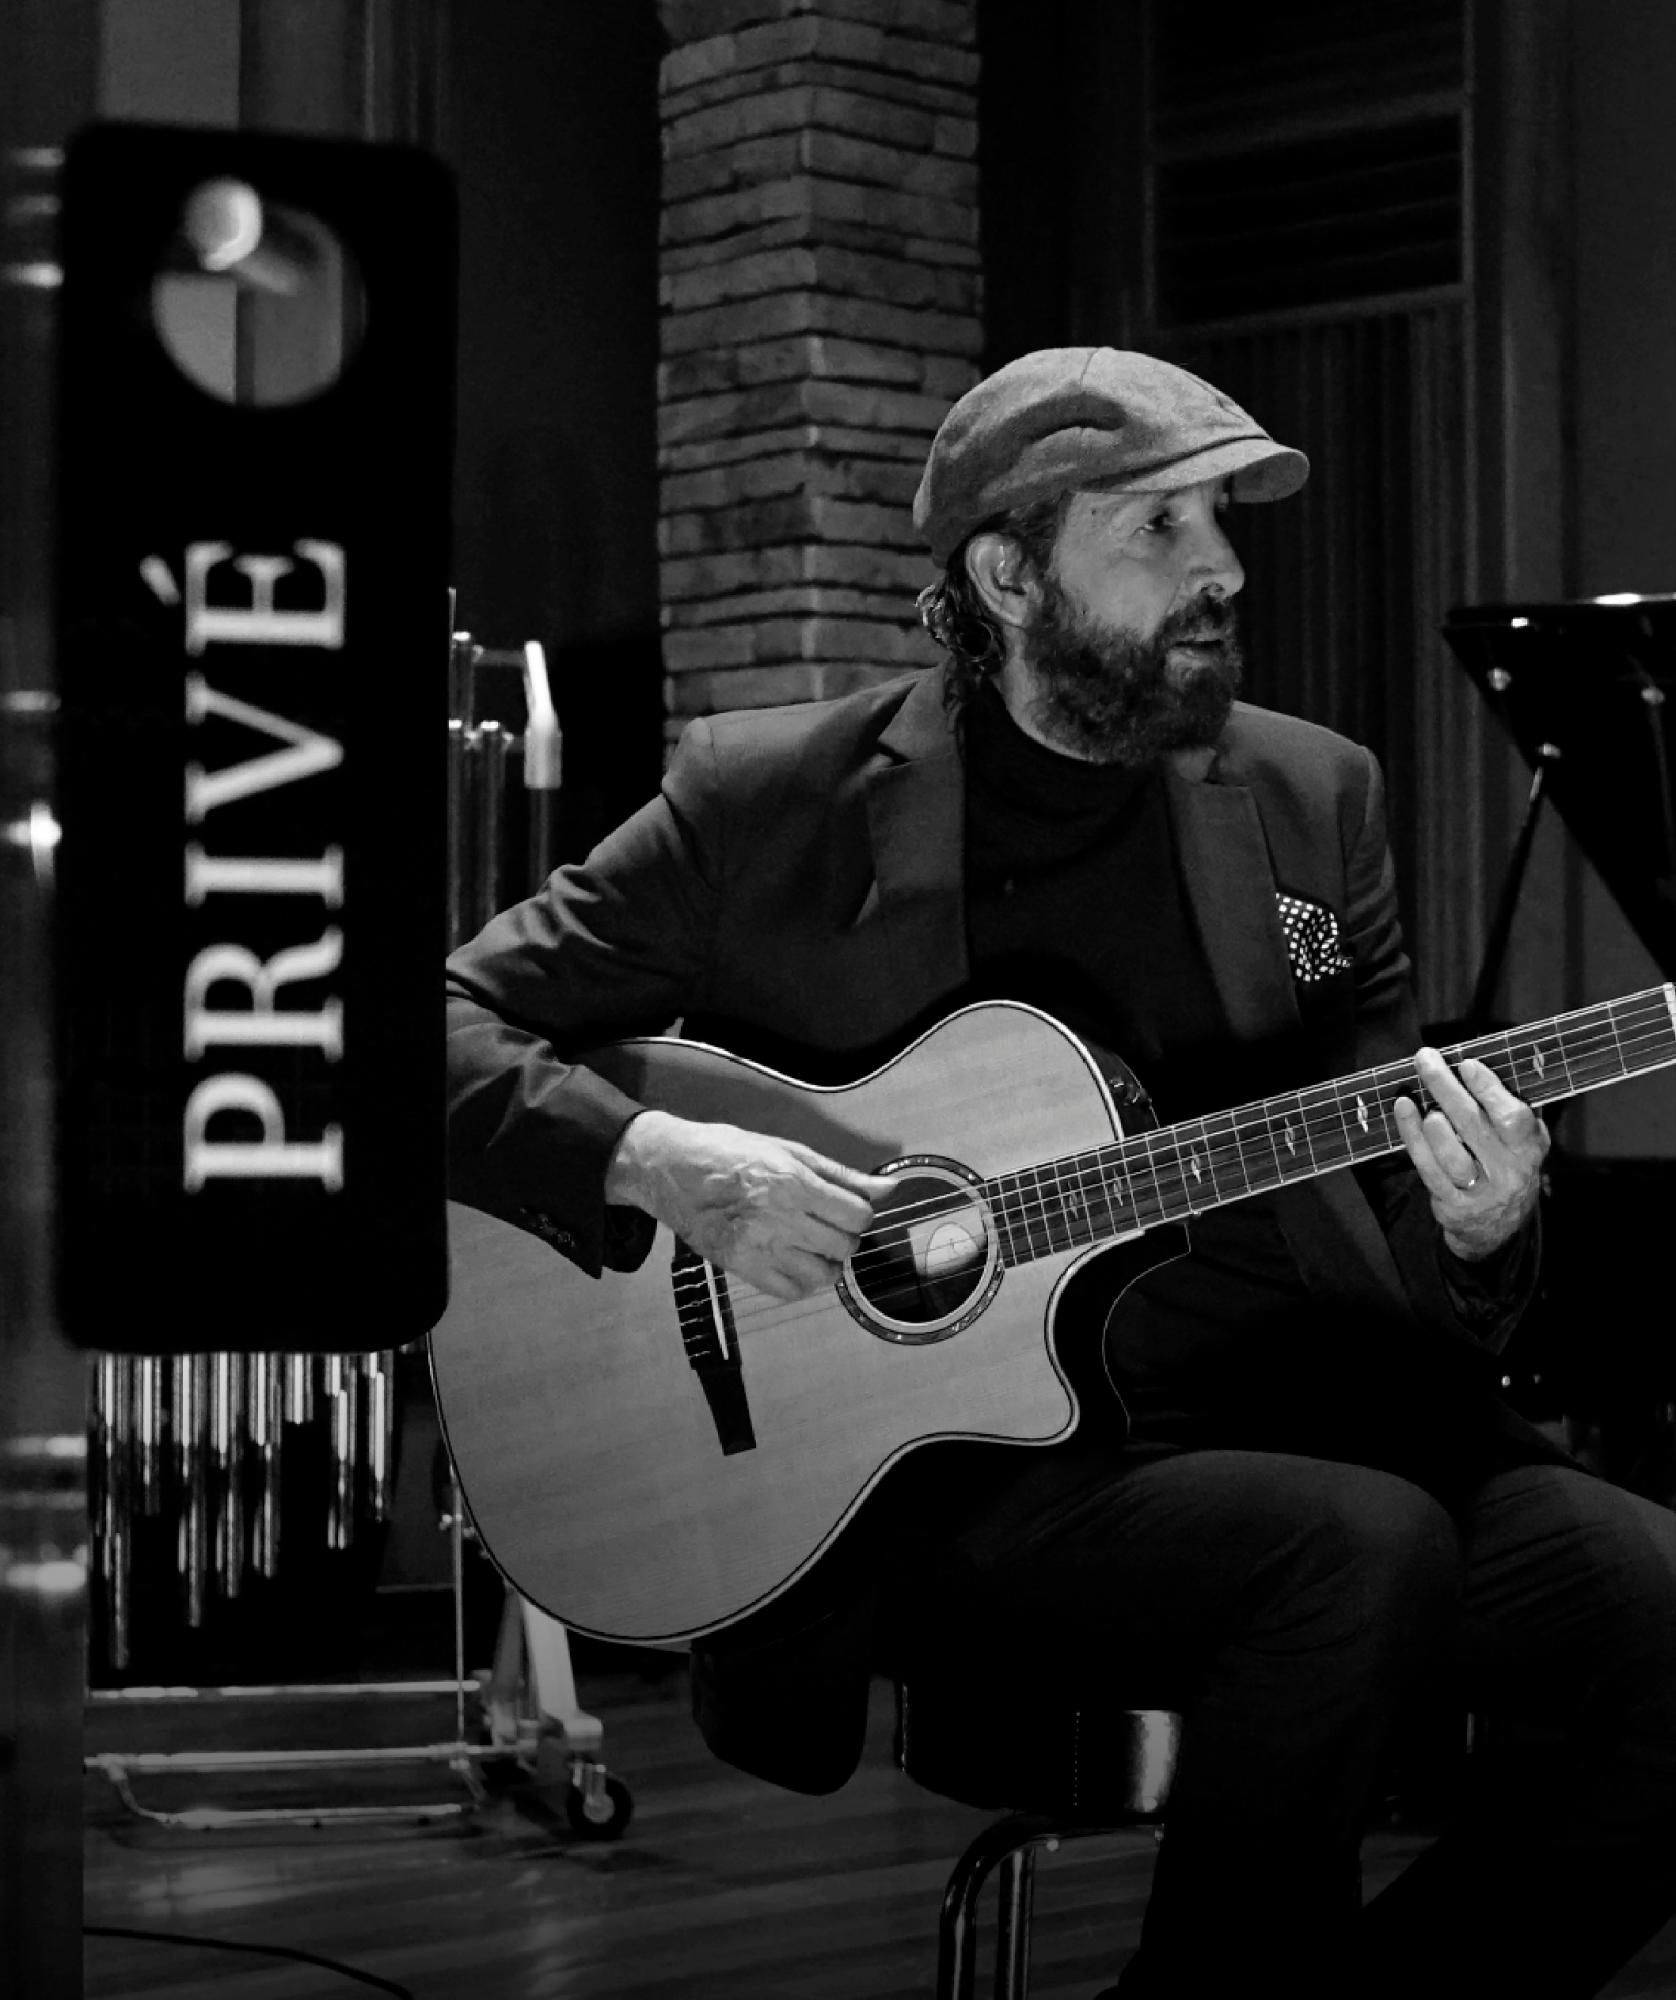 Juan Luis Guerra realizes the second part of “Private”